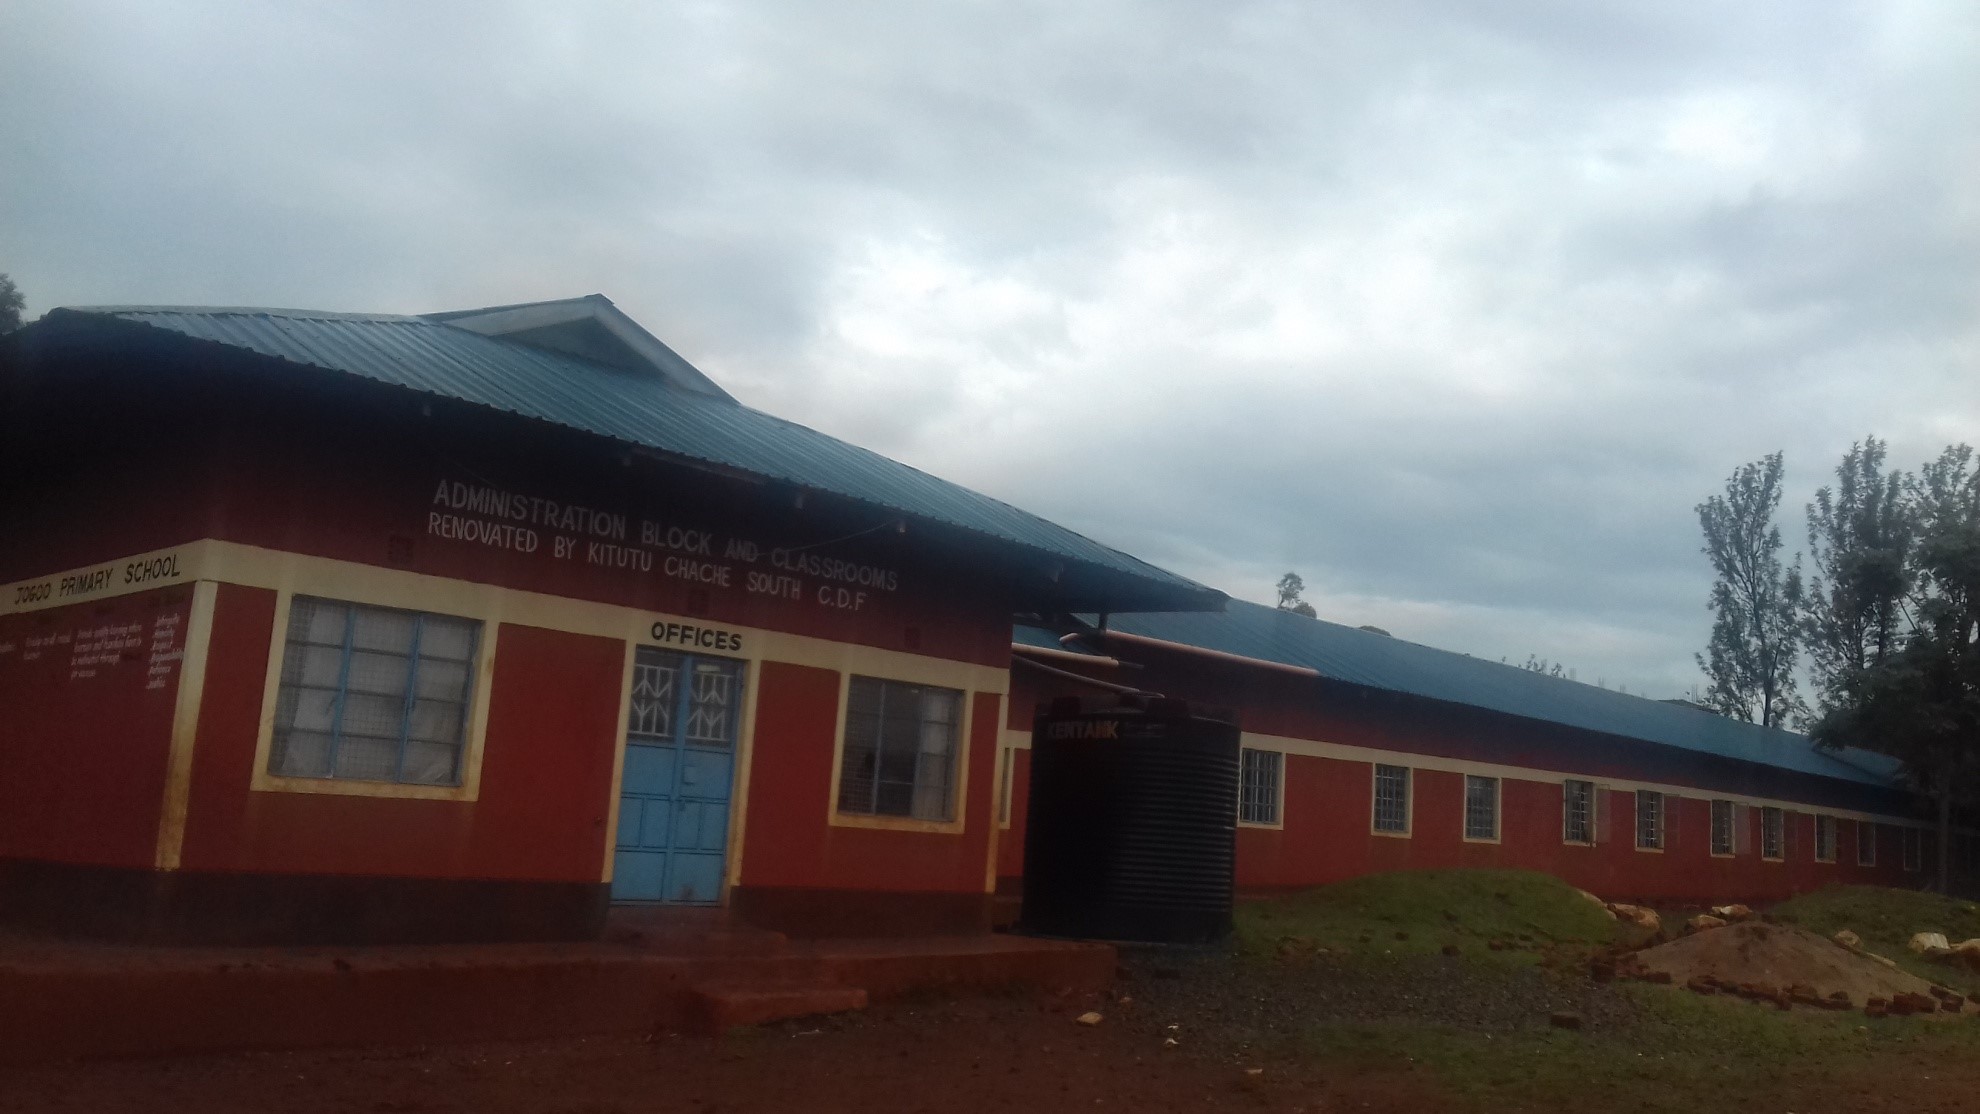 https://kitutuchache-south.ngcdf.go.ke/wp-content/uploads/2021/08/KITUTU-CHACHE-SOUTH-NG-CDF-PROJECT-8-CLASSROOMS-AND-ADMISTRATION-BLOCK-RENOVATED-BY-NG-CDF-AT-JOGOO-PRIMARY-SCHOOL.jpg